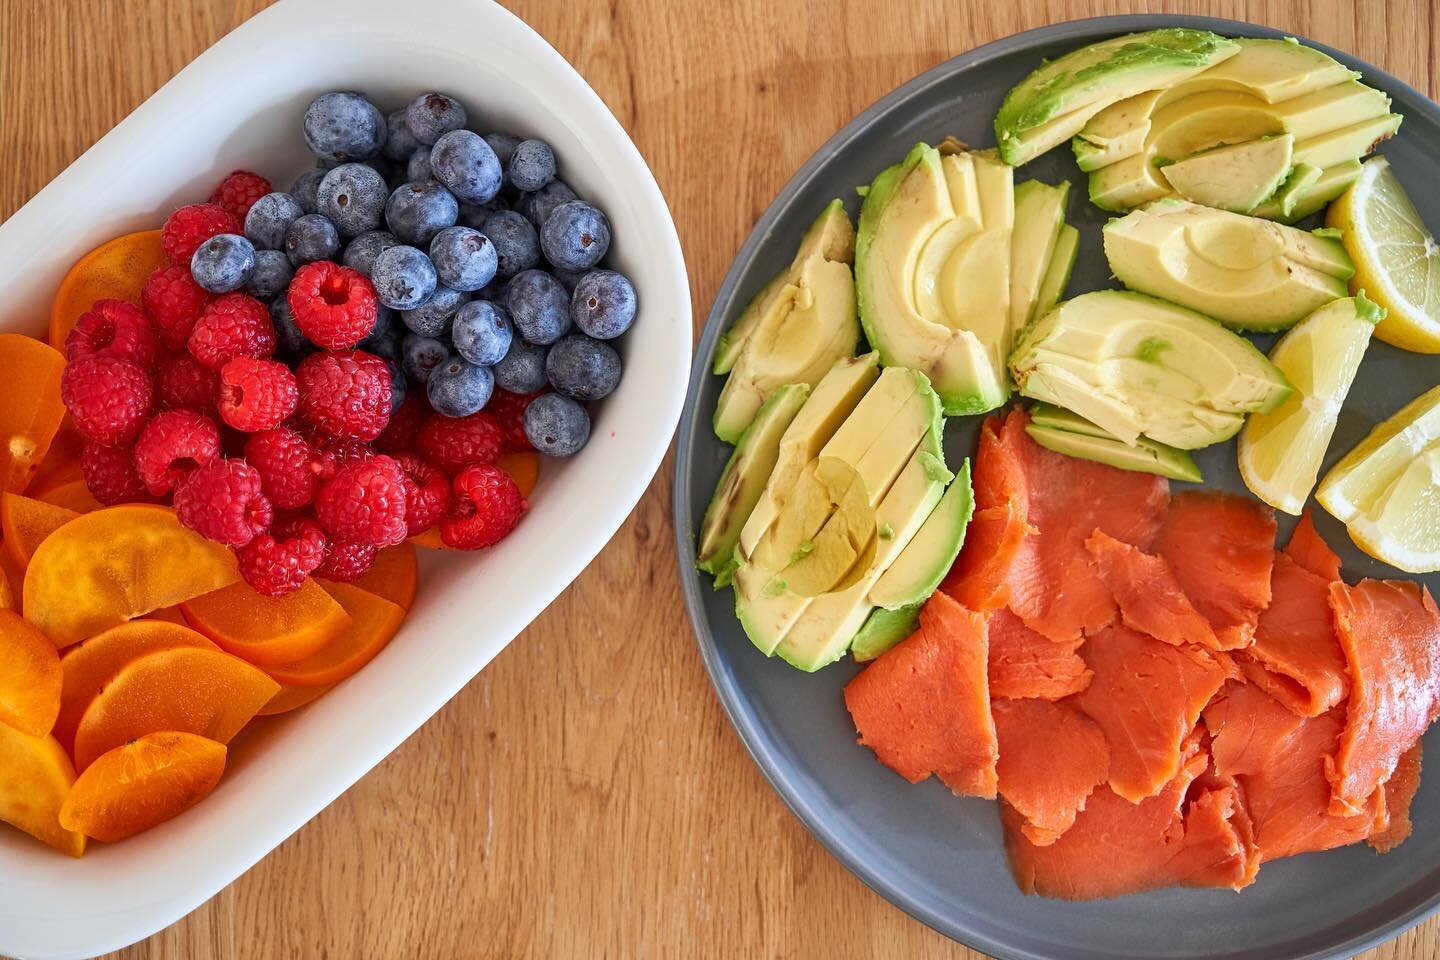 Brunch colors for the weekend. 🌈

Fruits and berries and smoked salmon and avocado.

#brunch #incarinaskitchen #brunchbuffet #brunchtime #brunching #brunchinspo #brunchlife #f52grams #feedfeed #foodandwine #forkyeah